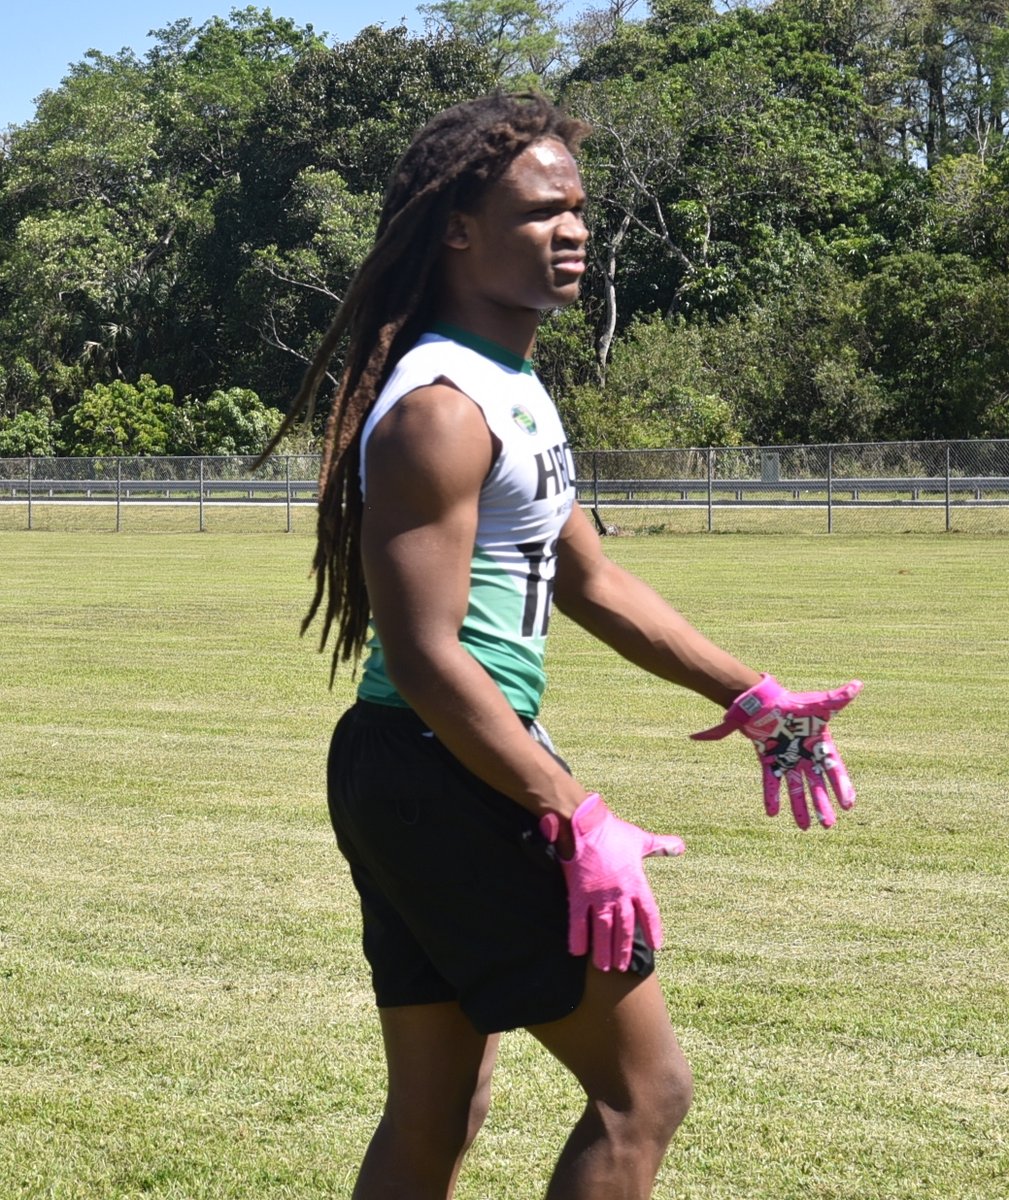 25' Nickel Antonio 'Lights Out' Ward @TonyYoungbull maybe the most explosive DB in South Florida. Kid is a menace, IYKYK! Film dont lie! hudl.com/v/2LqcrG @Coach_Odums